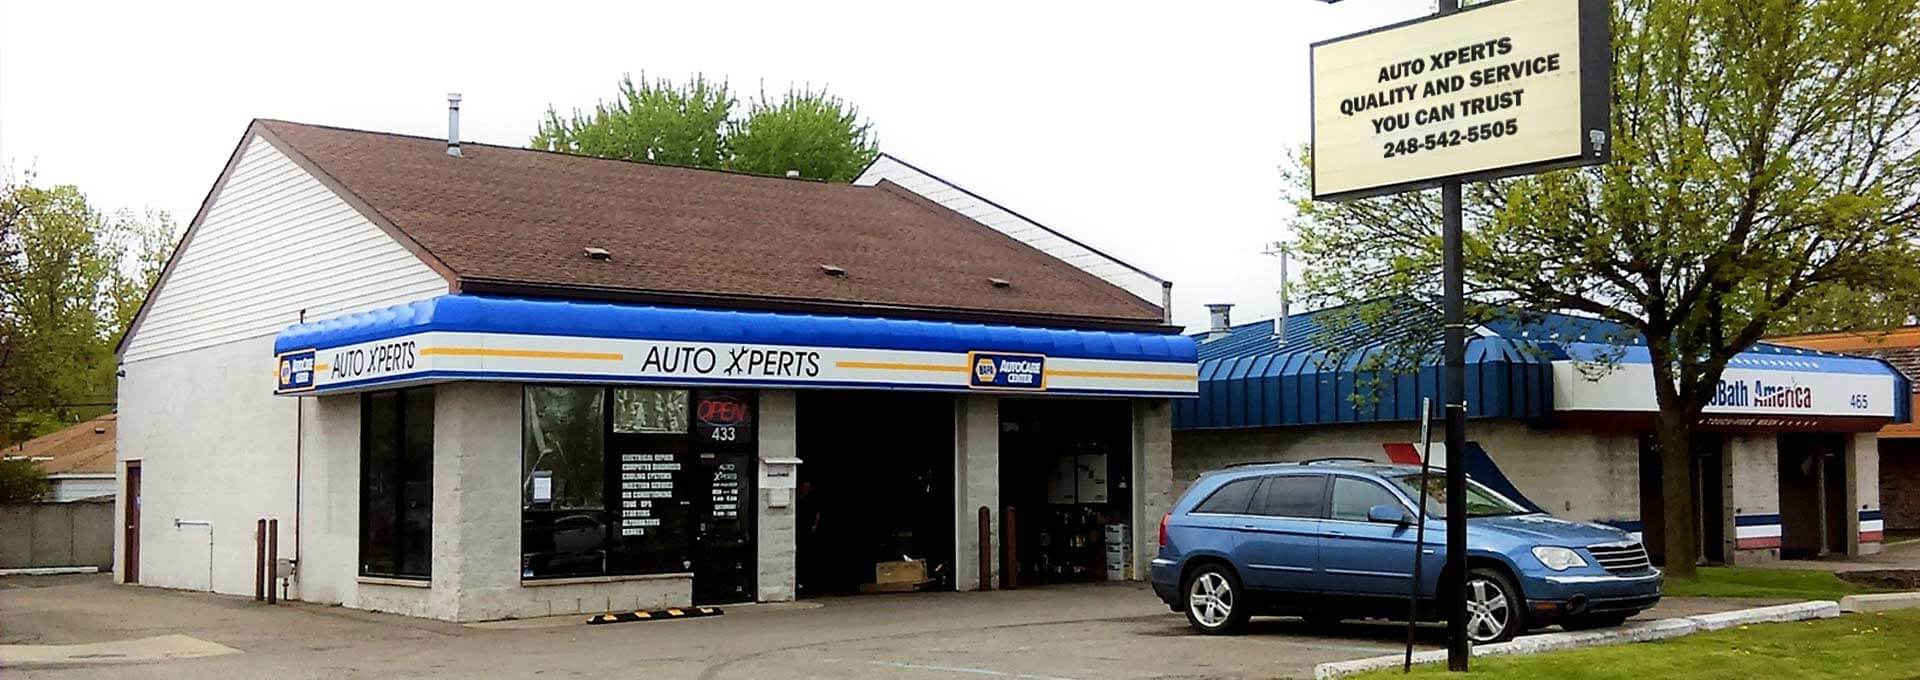 Auto Service & Auto Repair in Madison Heights | Auto Xperts